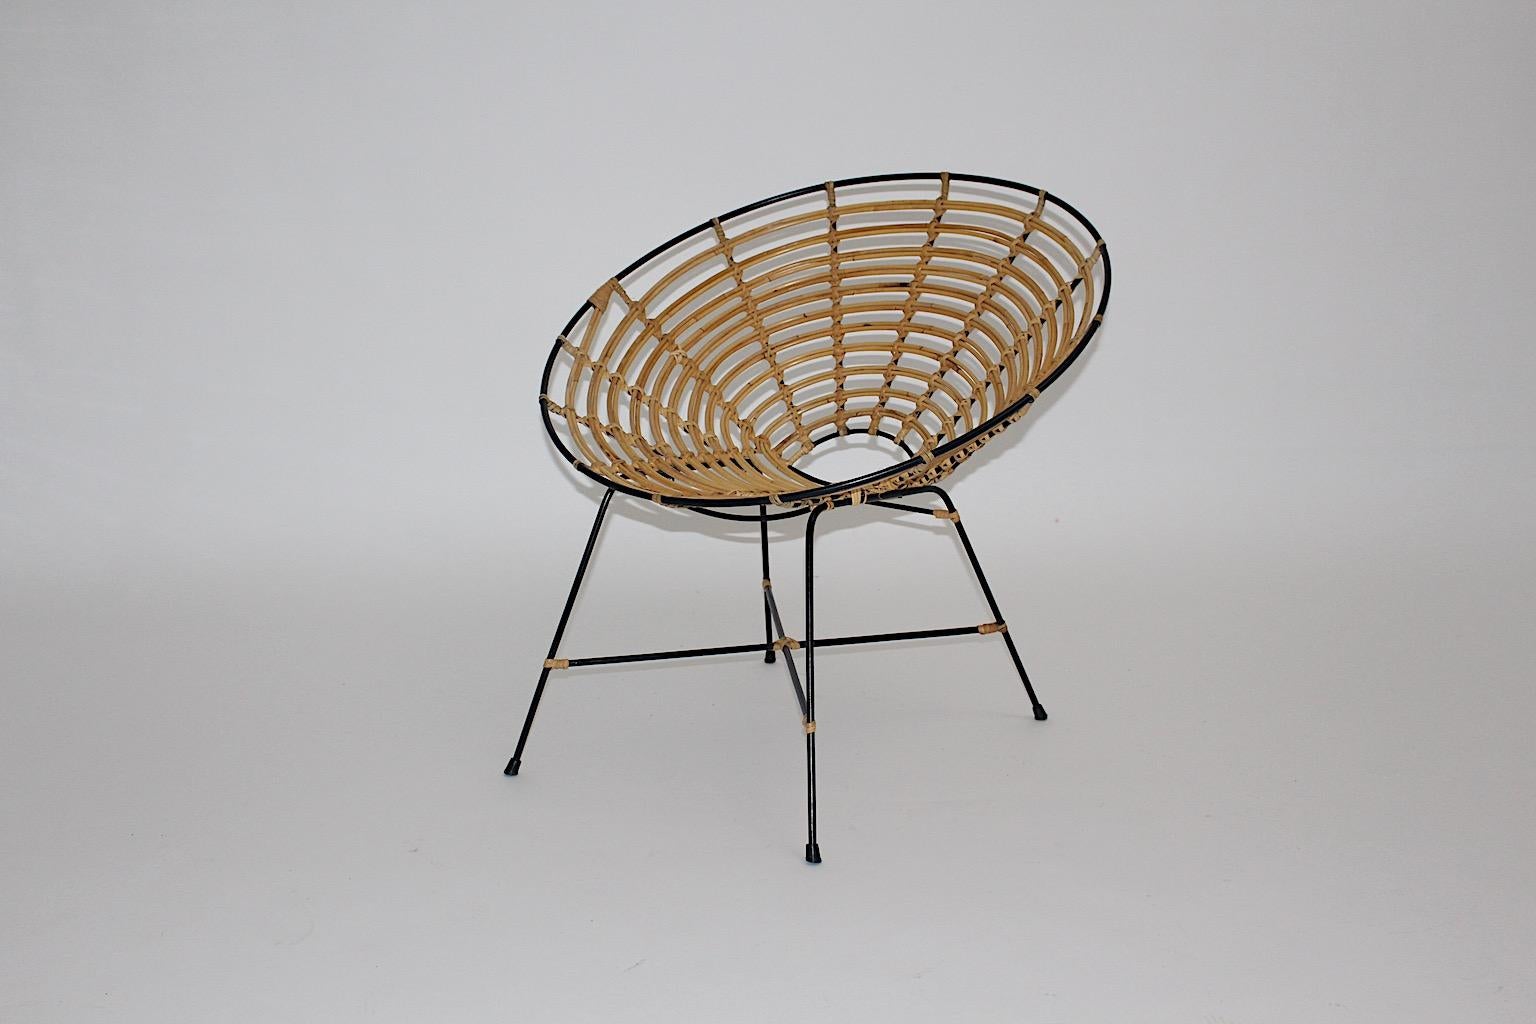 Italian Bamboo Rattan Brown Vintage Mid-Century Modern Lounge Chair, Italy, 1960s For Sale